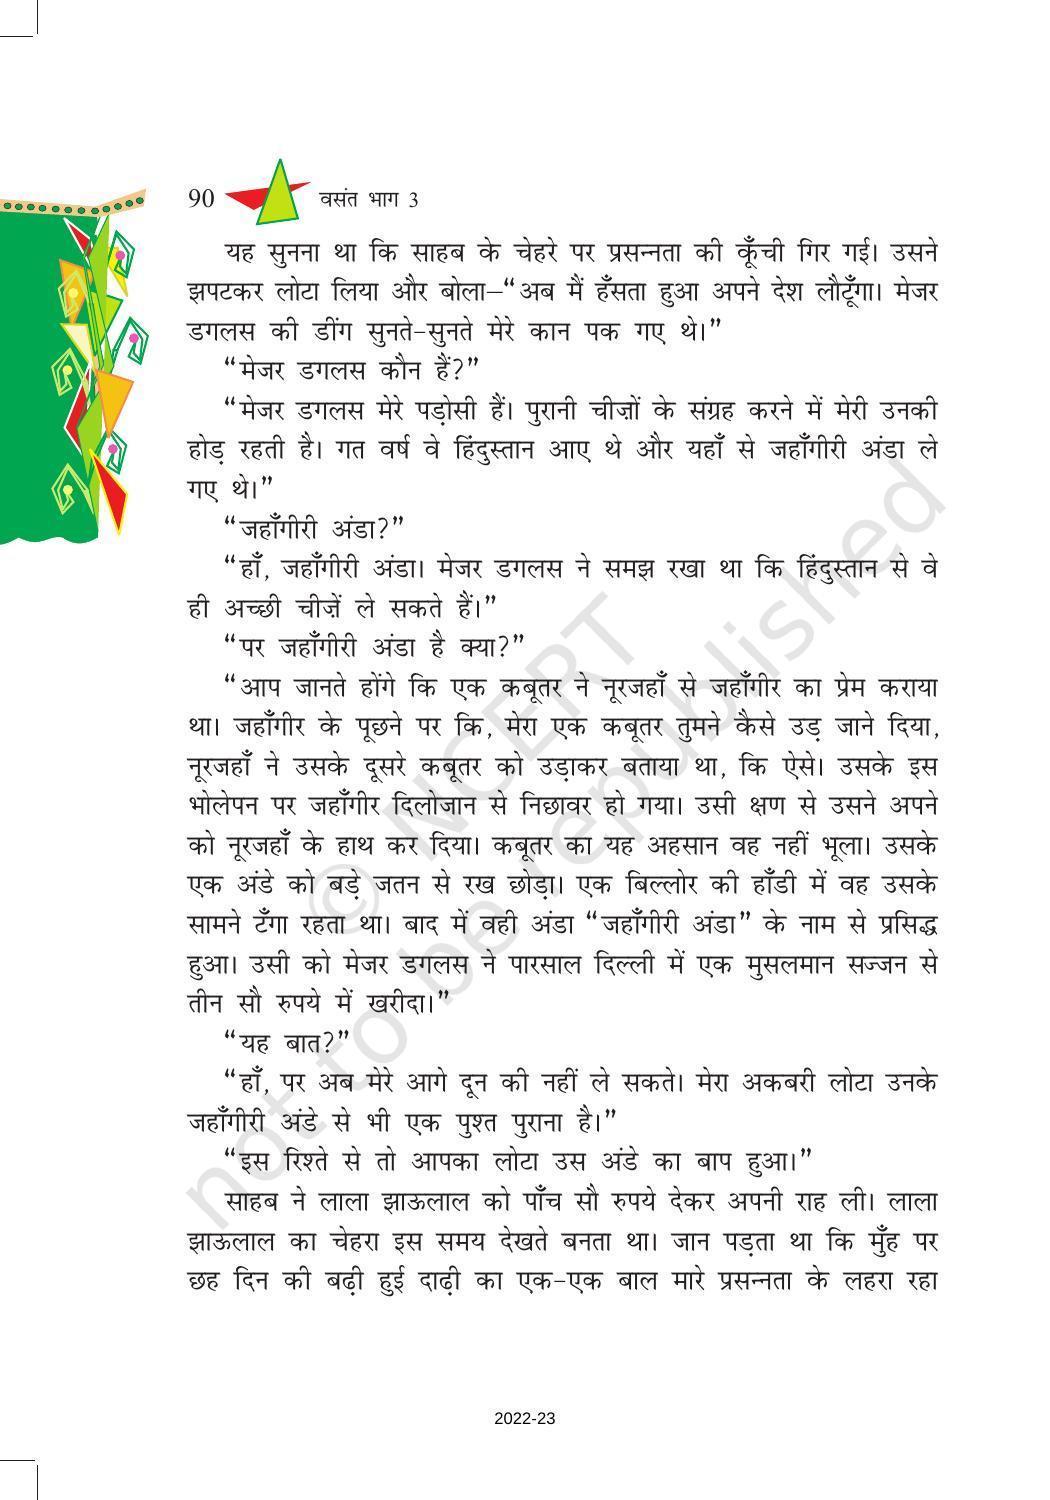 NCERT Book for Class 8 Hindi Vasant Chapter 14 अकबरी लोटा - Page 8